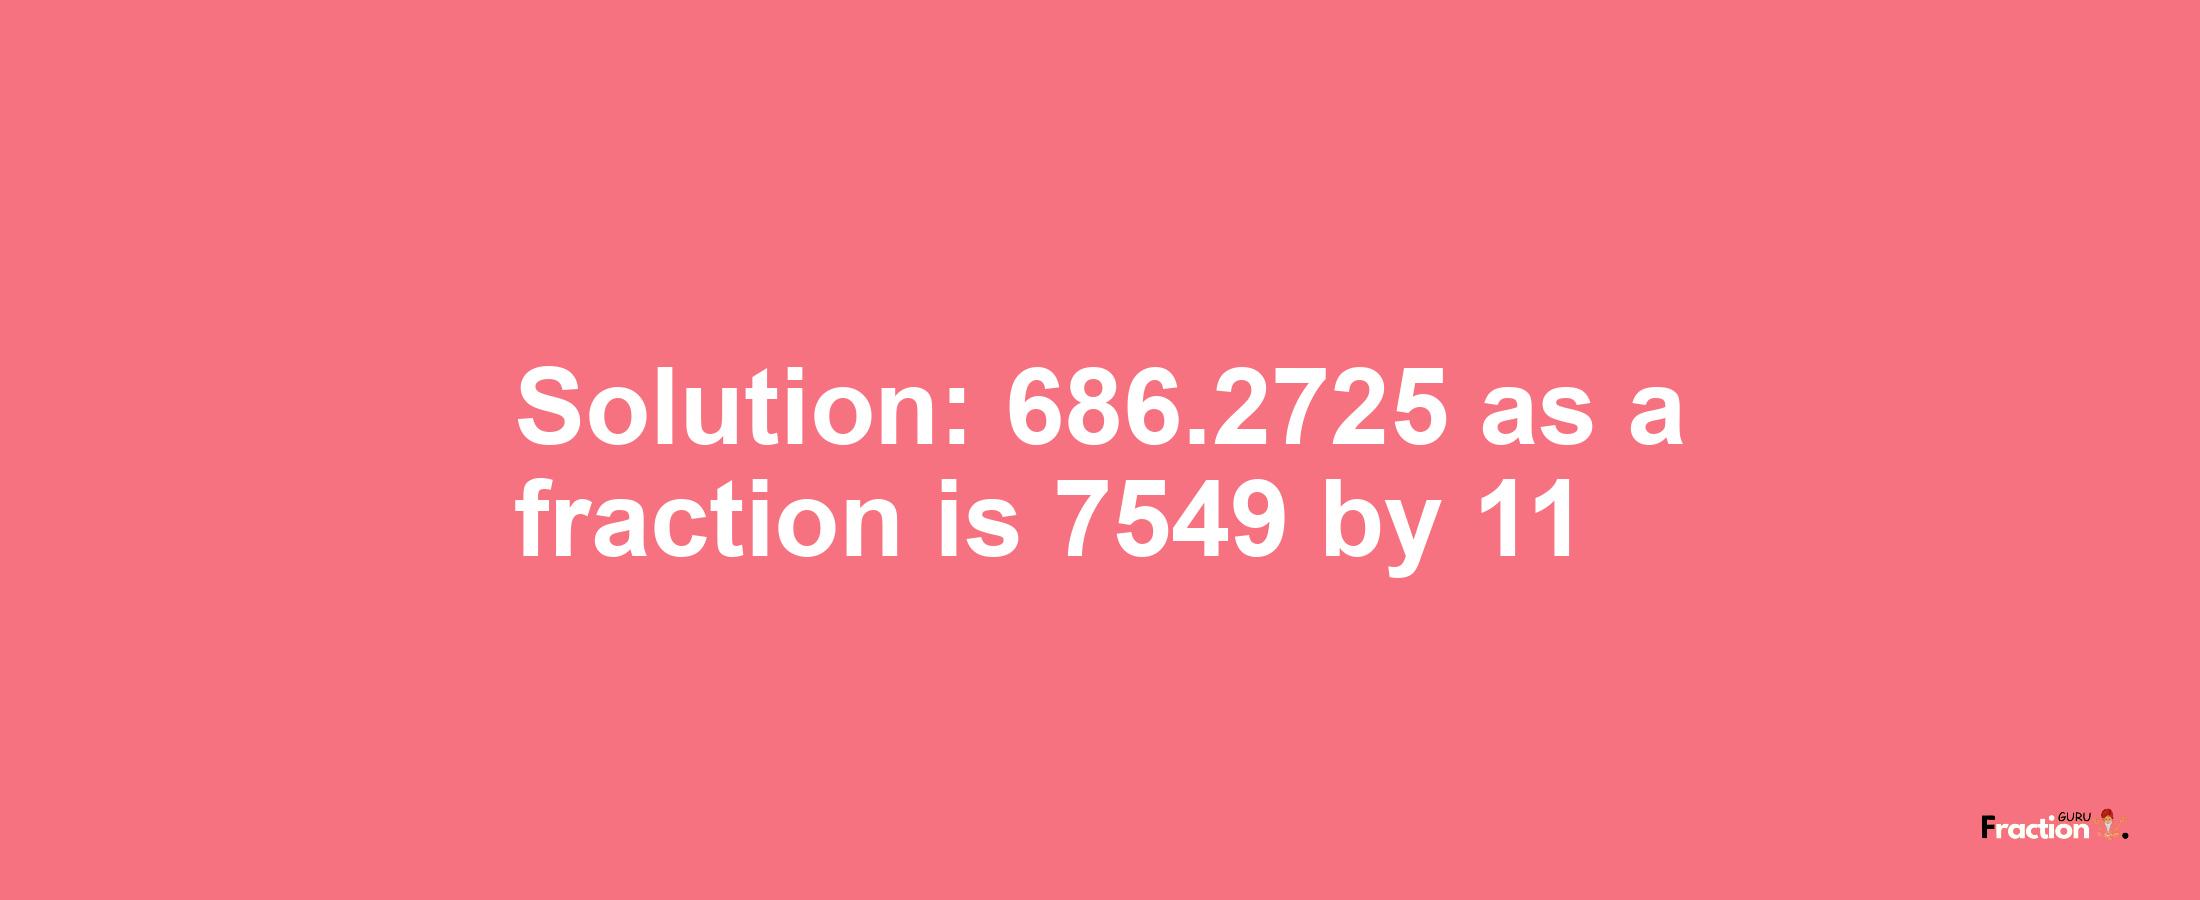 Solution:686.2725 as a fraction is 7549/11